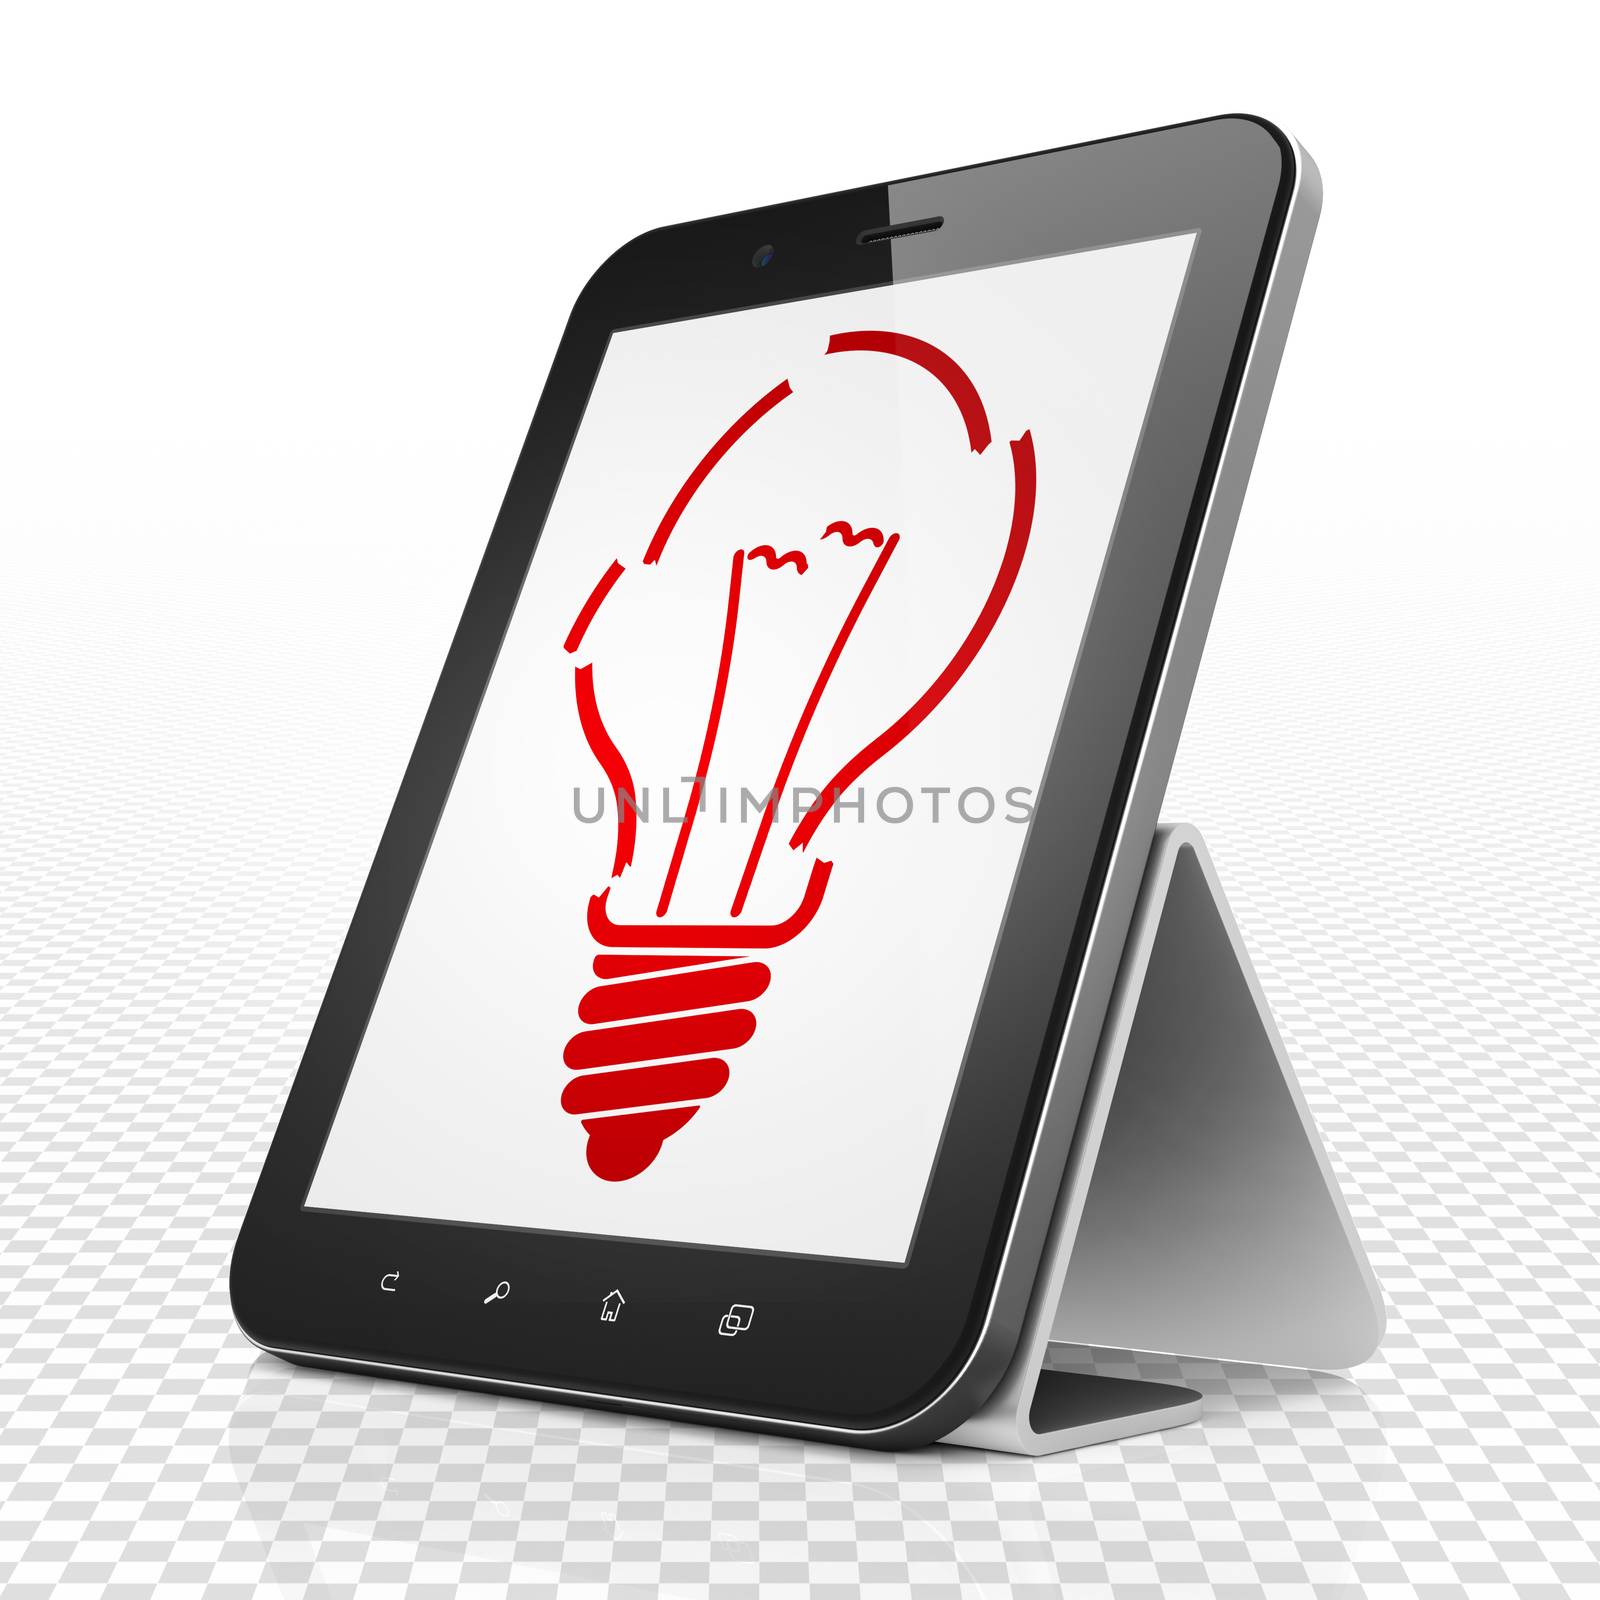 Finance concept: Tablet Computer with red Light Bulb icon on display